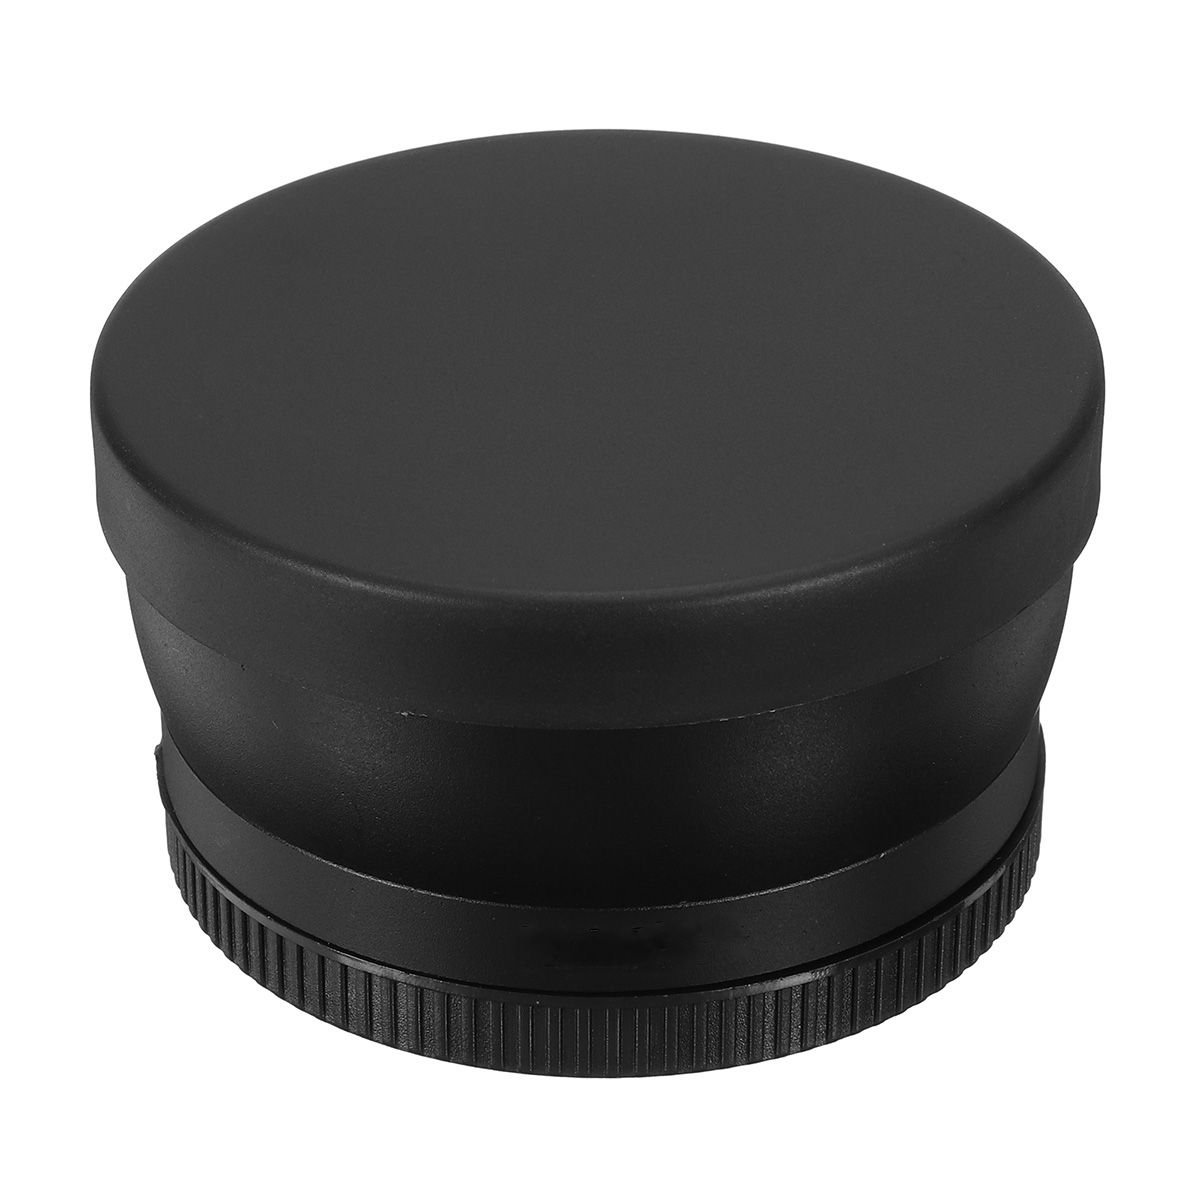 58mm-045X-Super-Wide-Angle-Lens-For-Canon-EOS-1000D-1100D-500D-Rebel-T1i-T2i-T3-1401462